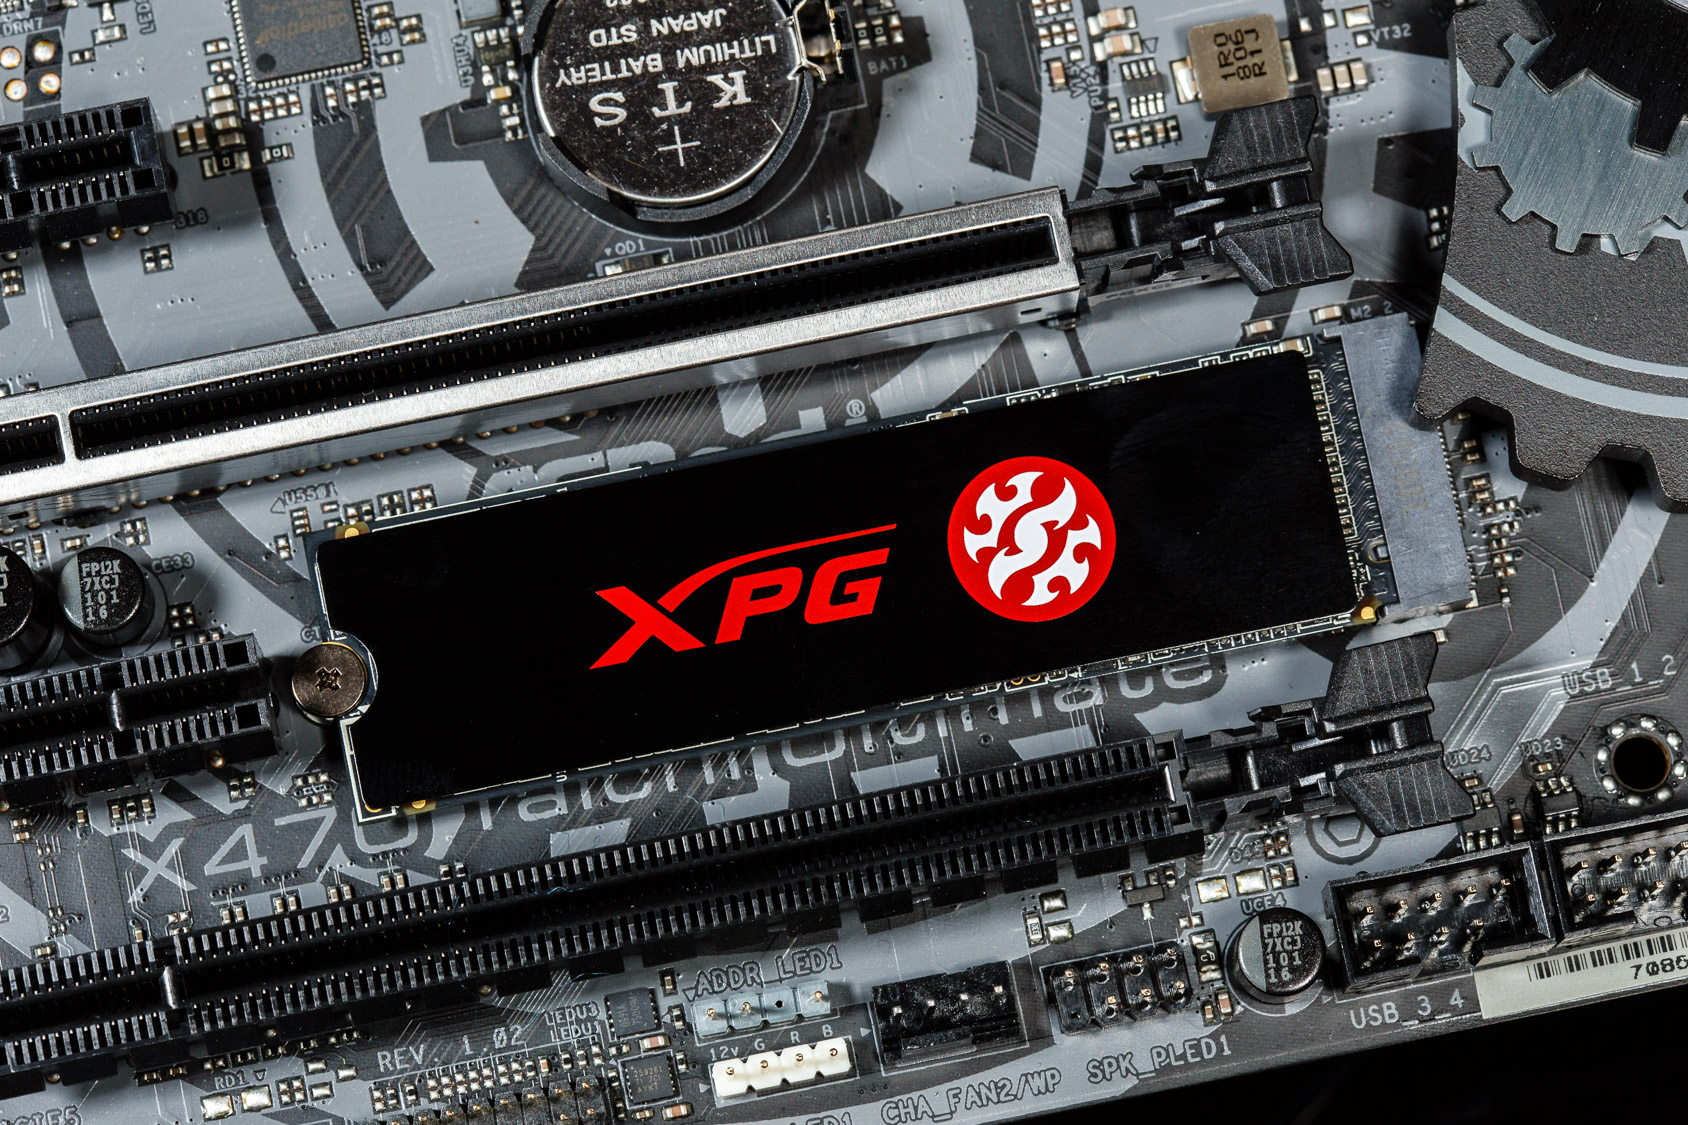 Adata XPG SX6000 Pro M.2 NVMe SSD Review: Paying More for Less